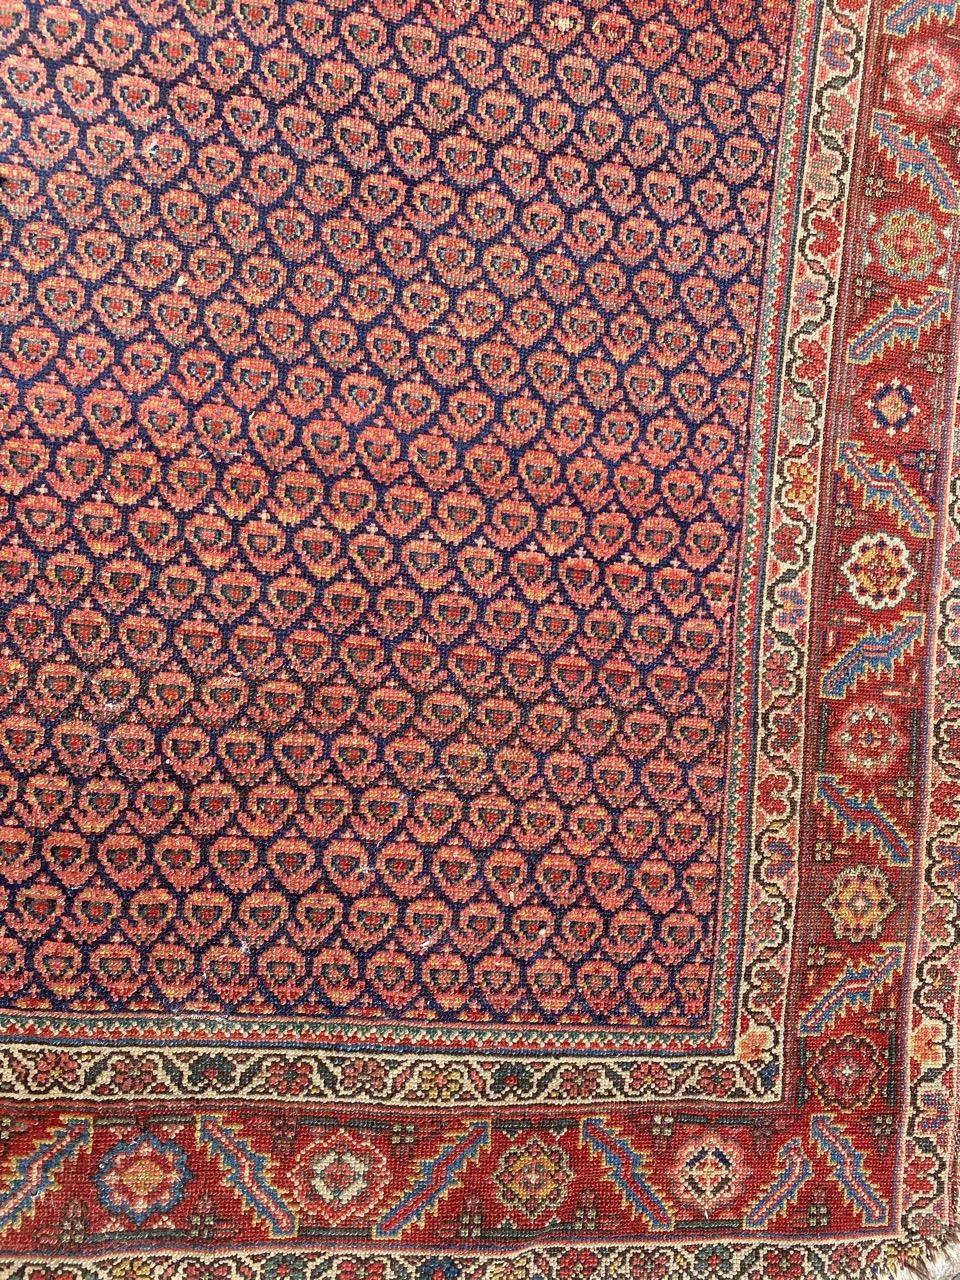 Very beautiful late 19th century Malayer runner with beautiful botteh design and nice natural colors, entirely hand knotted with wool velvet on cotton foundation.

✨✨✨
